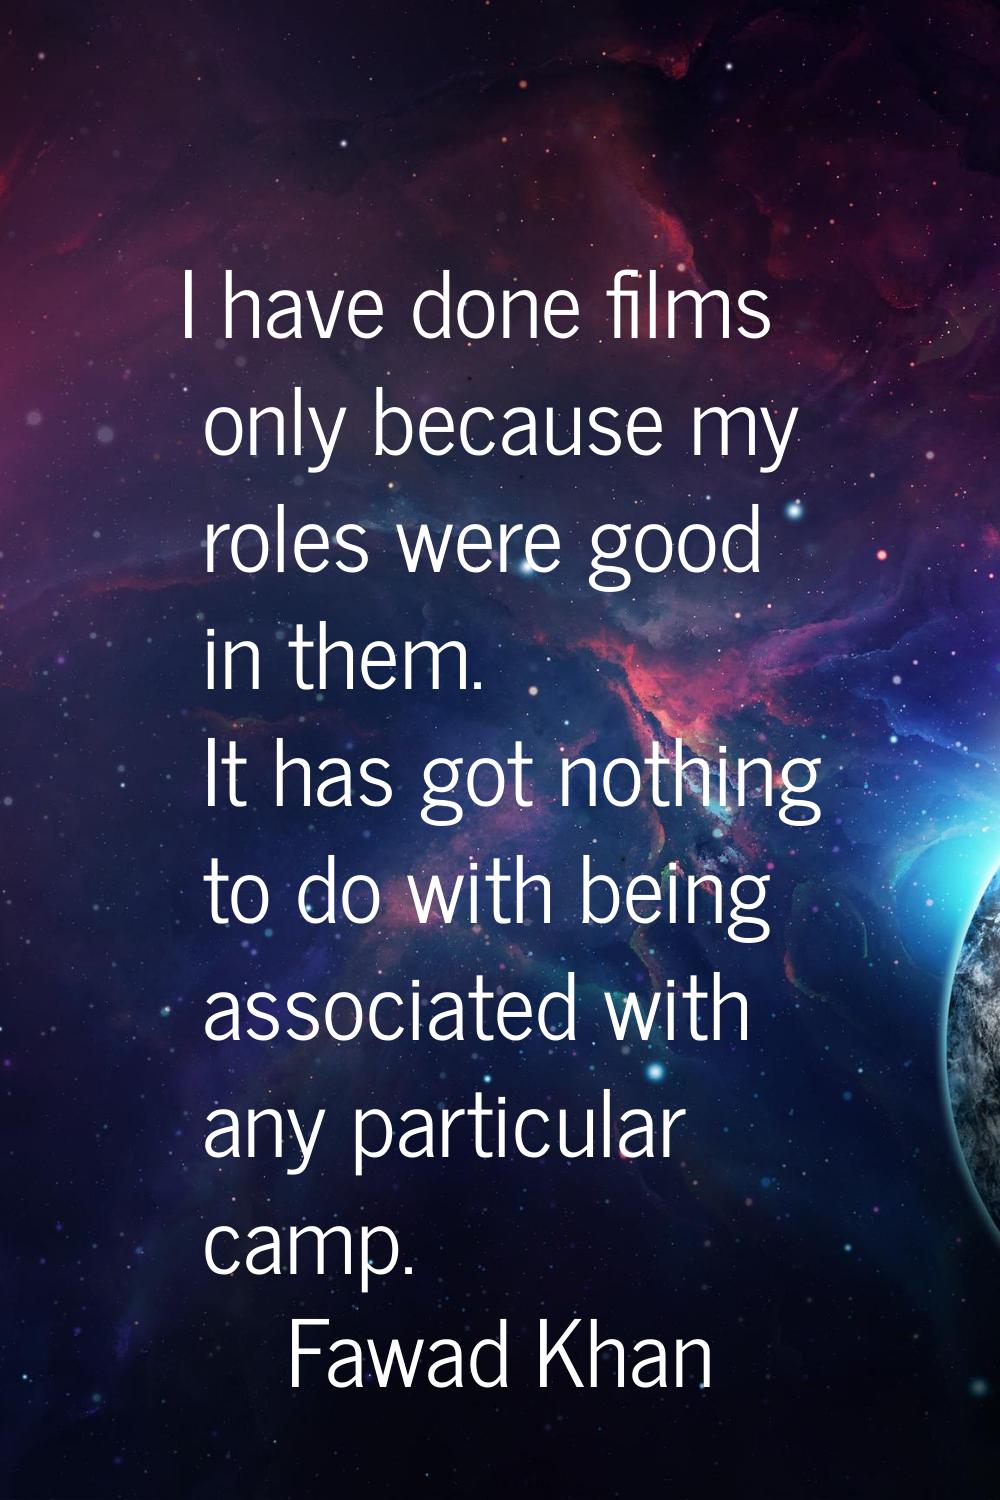 I have done films only because my roles were good in them. It has got nothing to do with being asso